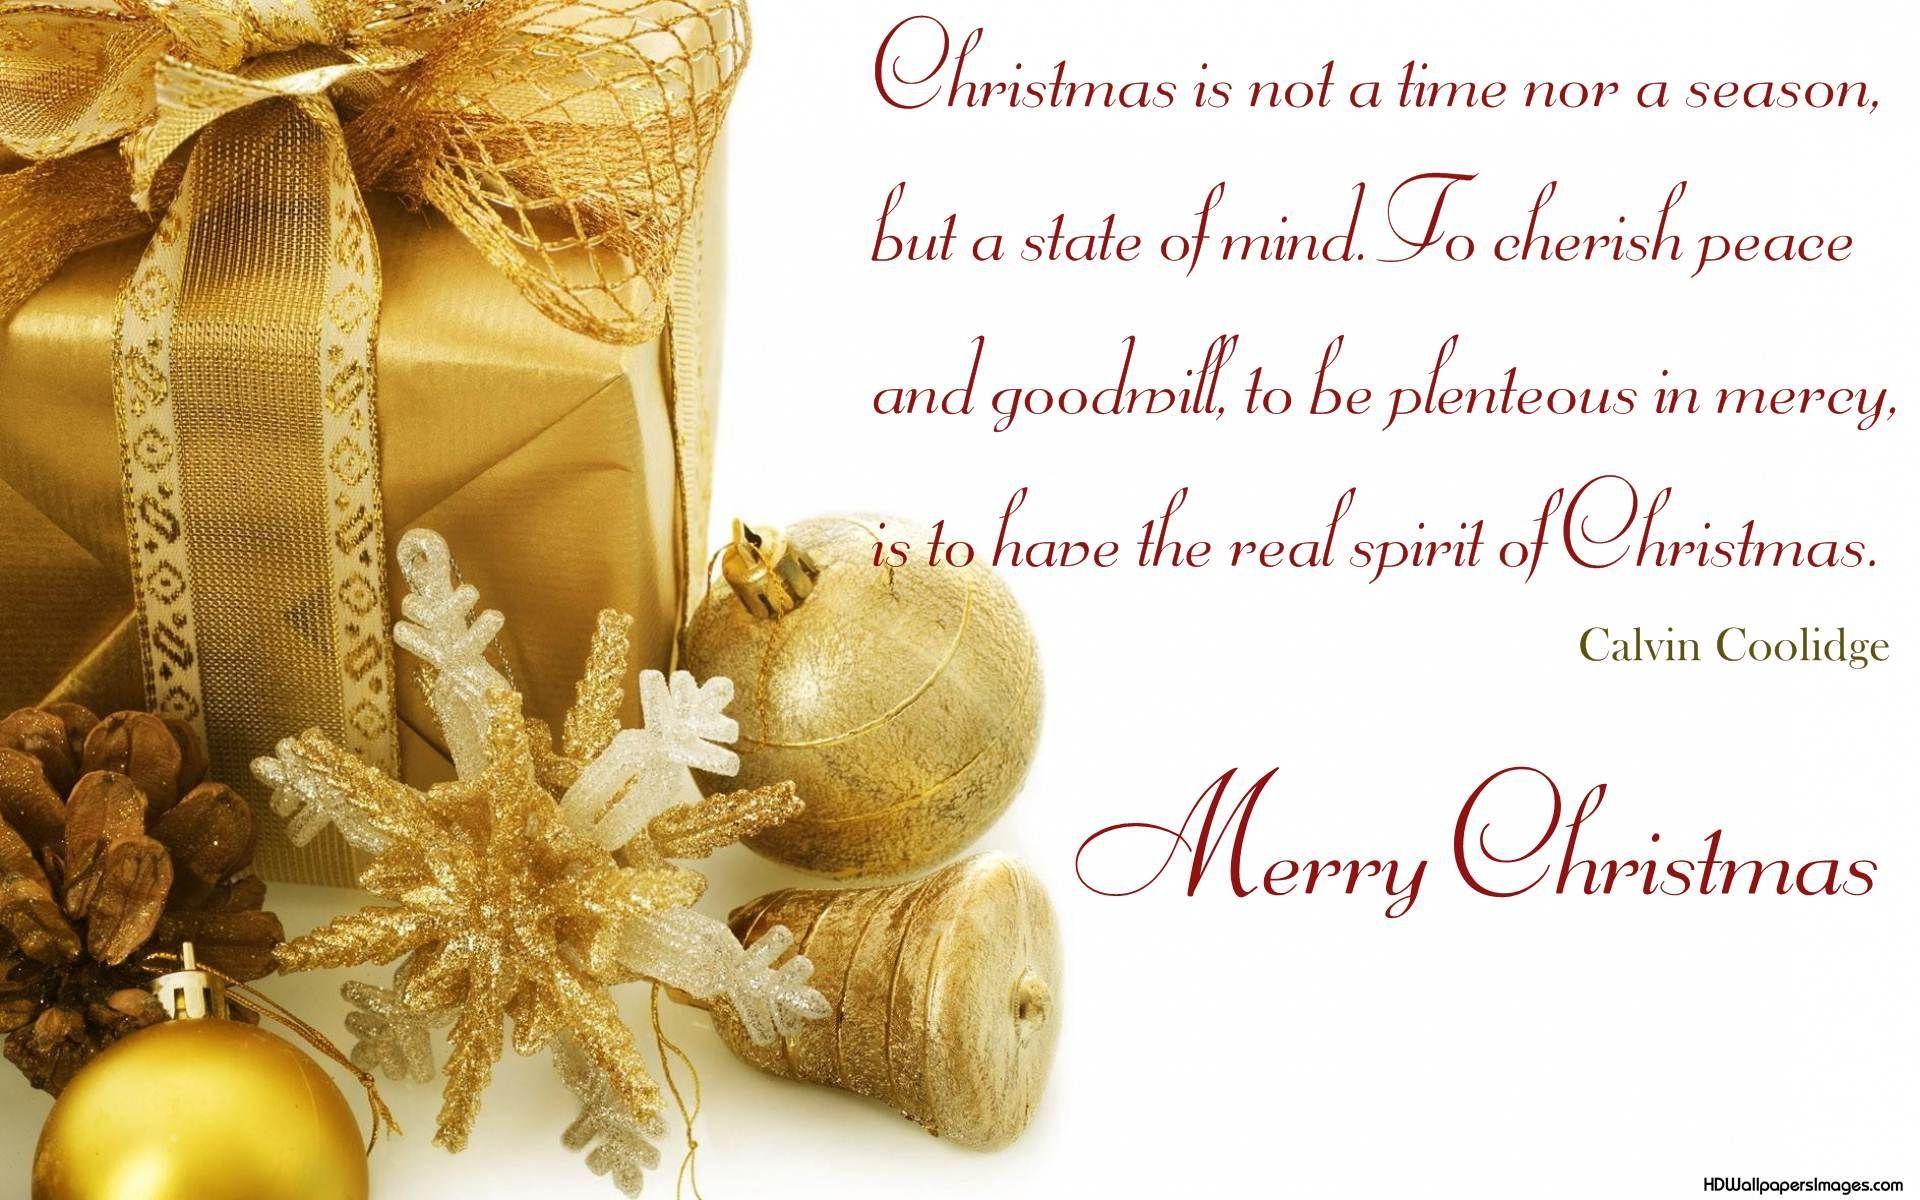 To cherish peace and goodwill the real spirit of christmas. Places